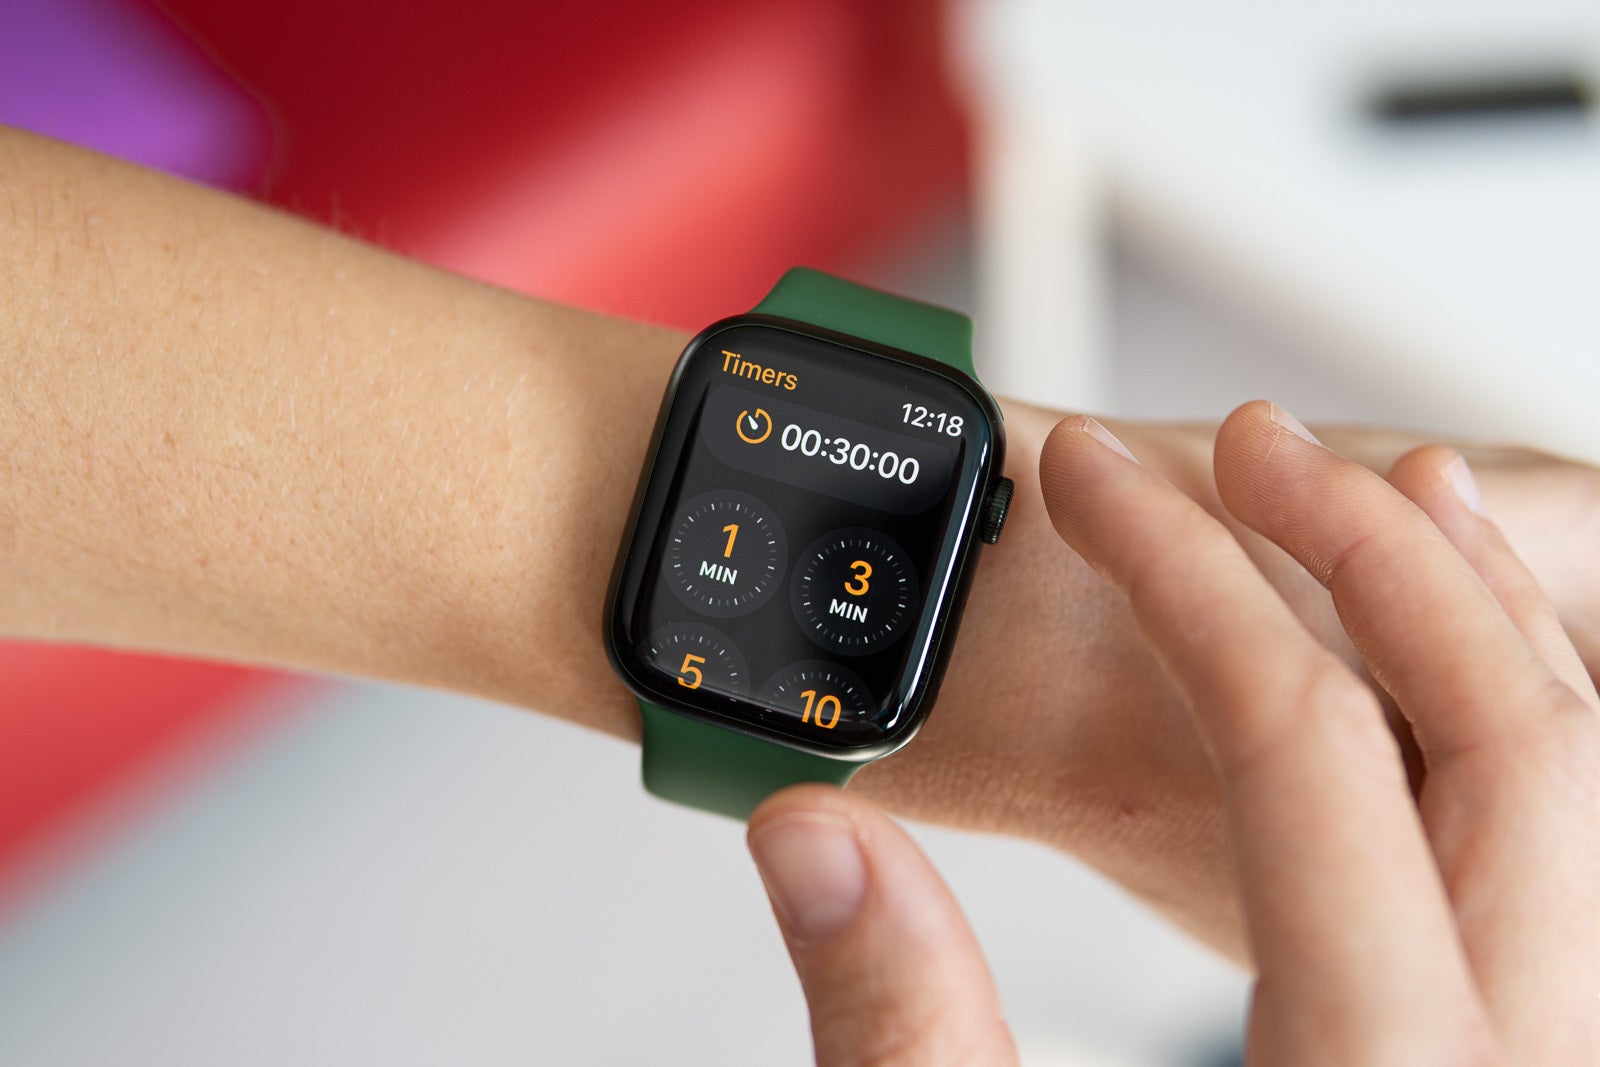 Apple Watch Series 7 can now have multiple timers - Apple Watch Series 7 Review